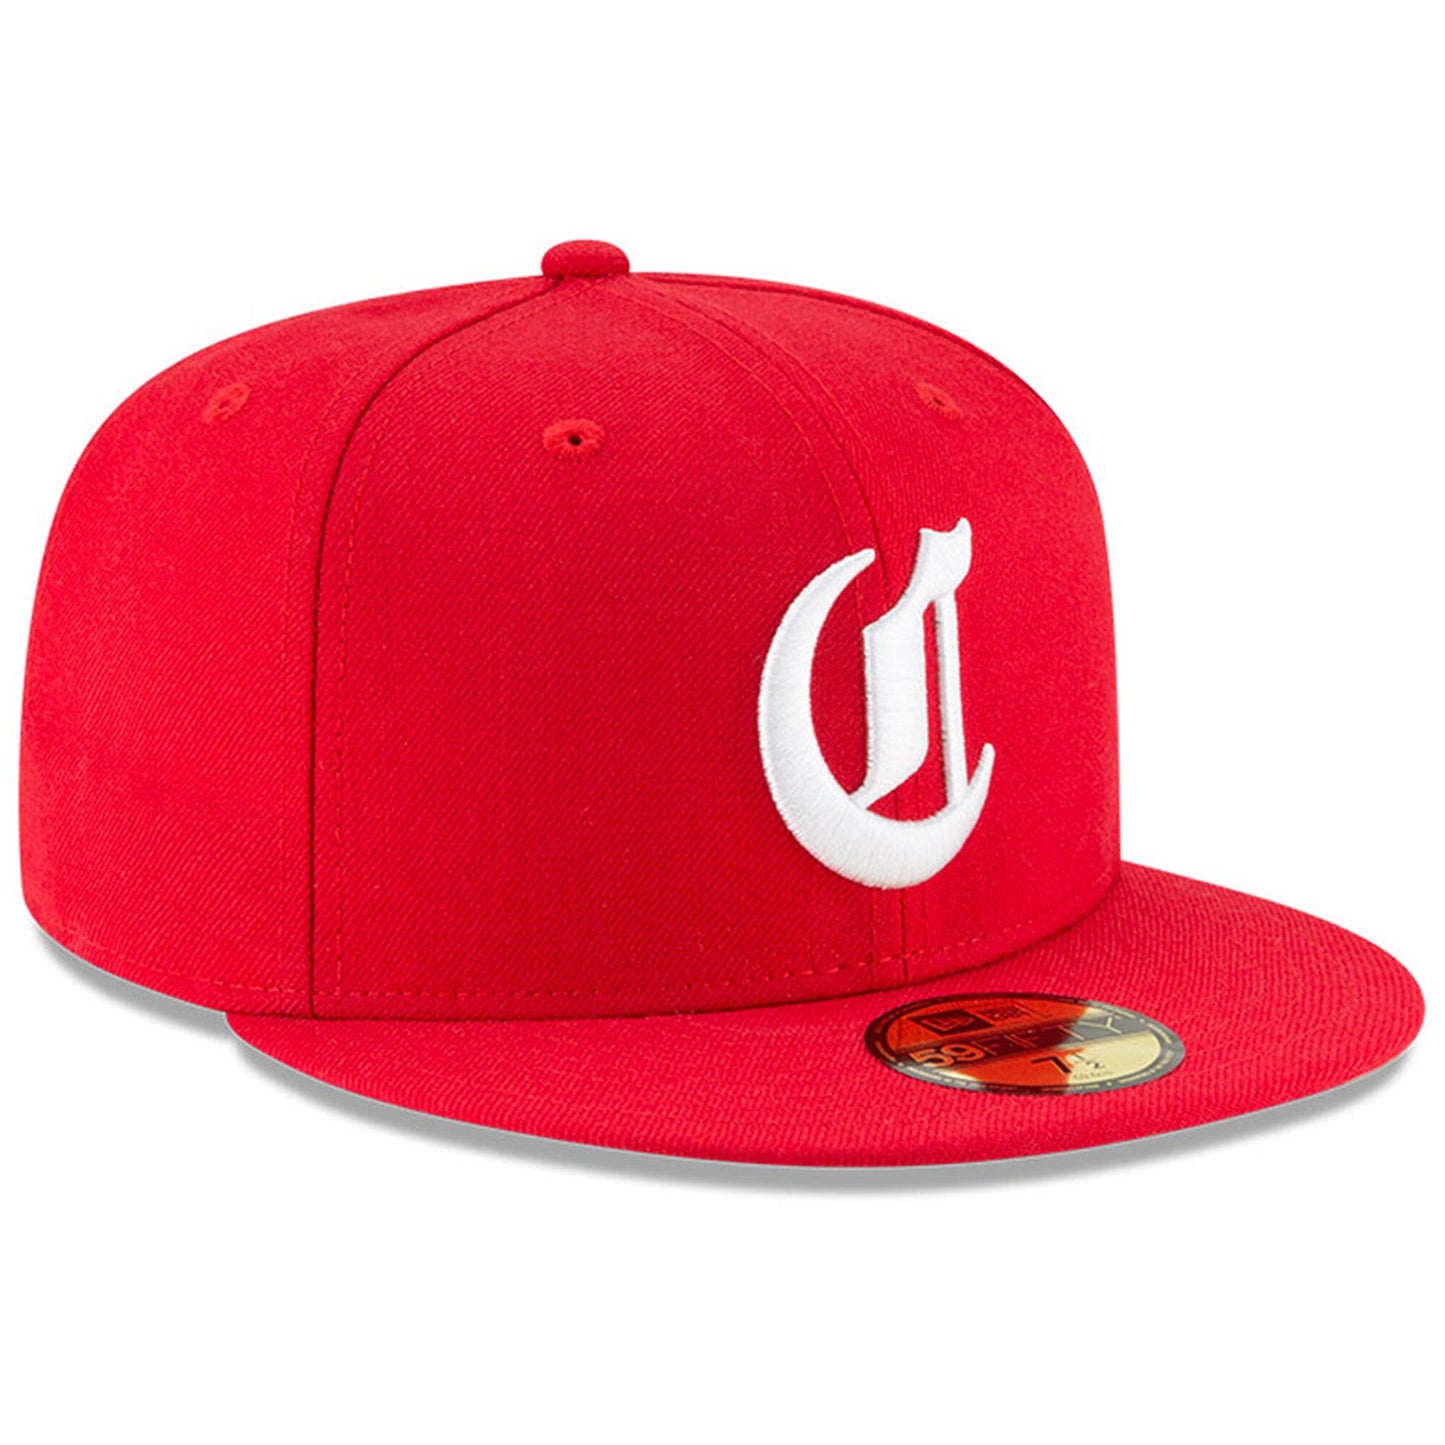 Men's Cincinnati Reds New Era Red Cooperstown Collection 1869 59FIFTY Fitted Hat